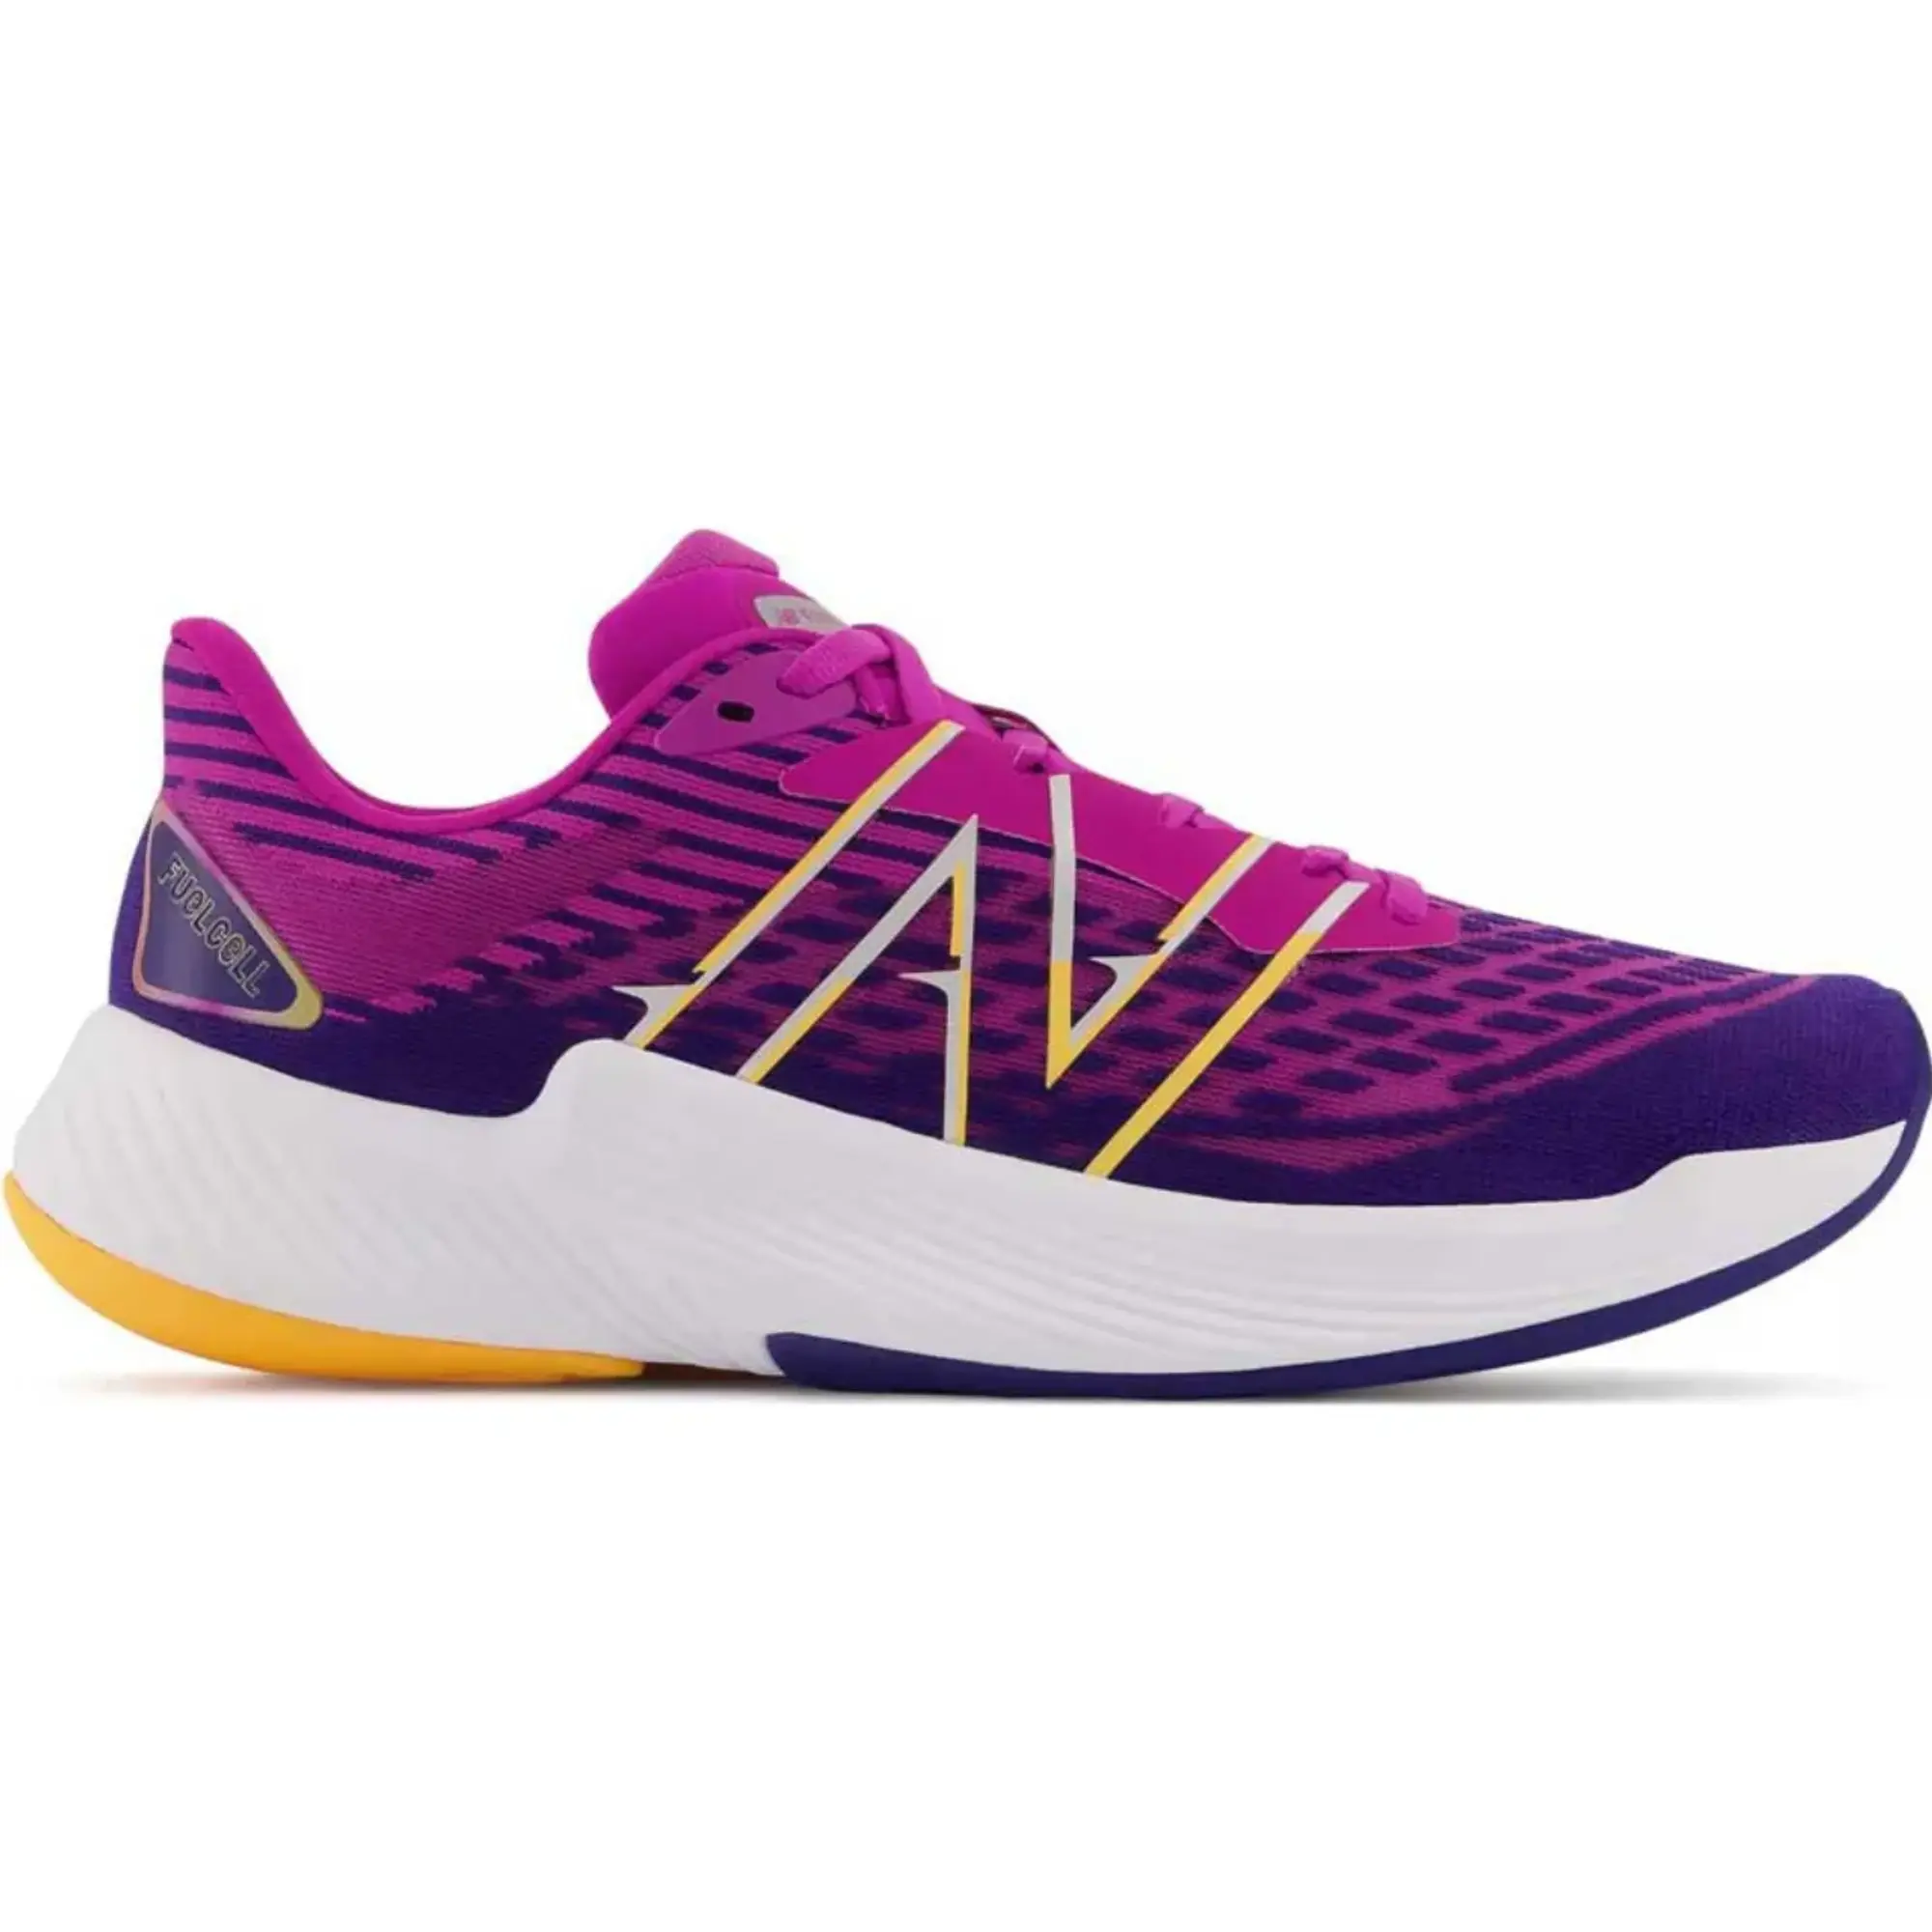 New Balance Women's FuelCell Prism v2 in Blue/Bleu/Pink/Rose/Yellow/Jaune Synthetic